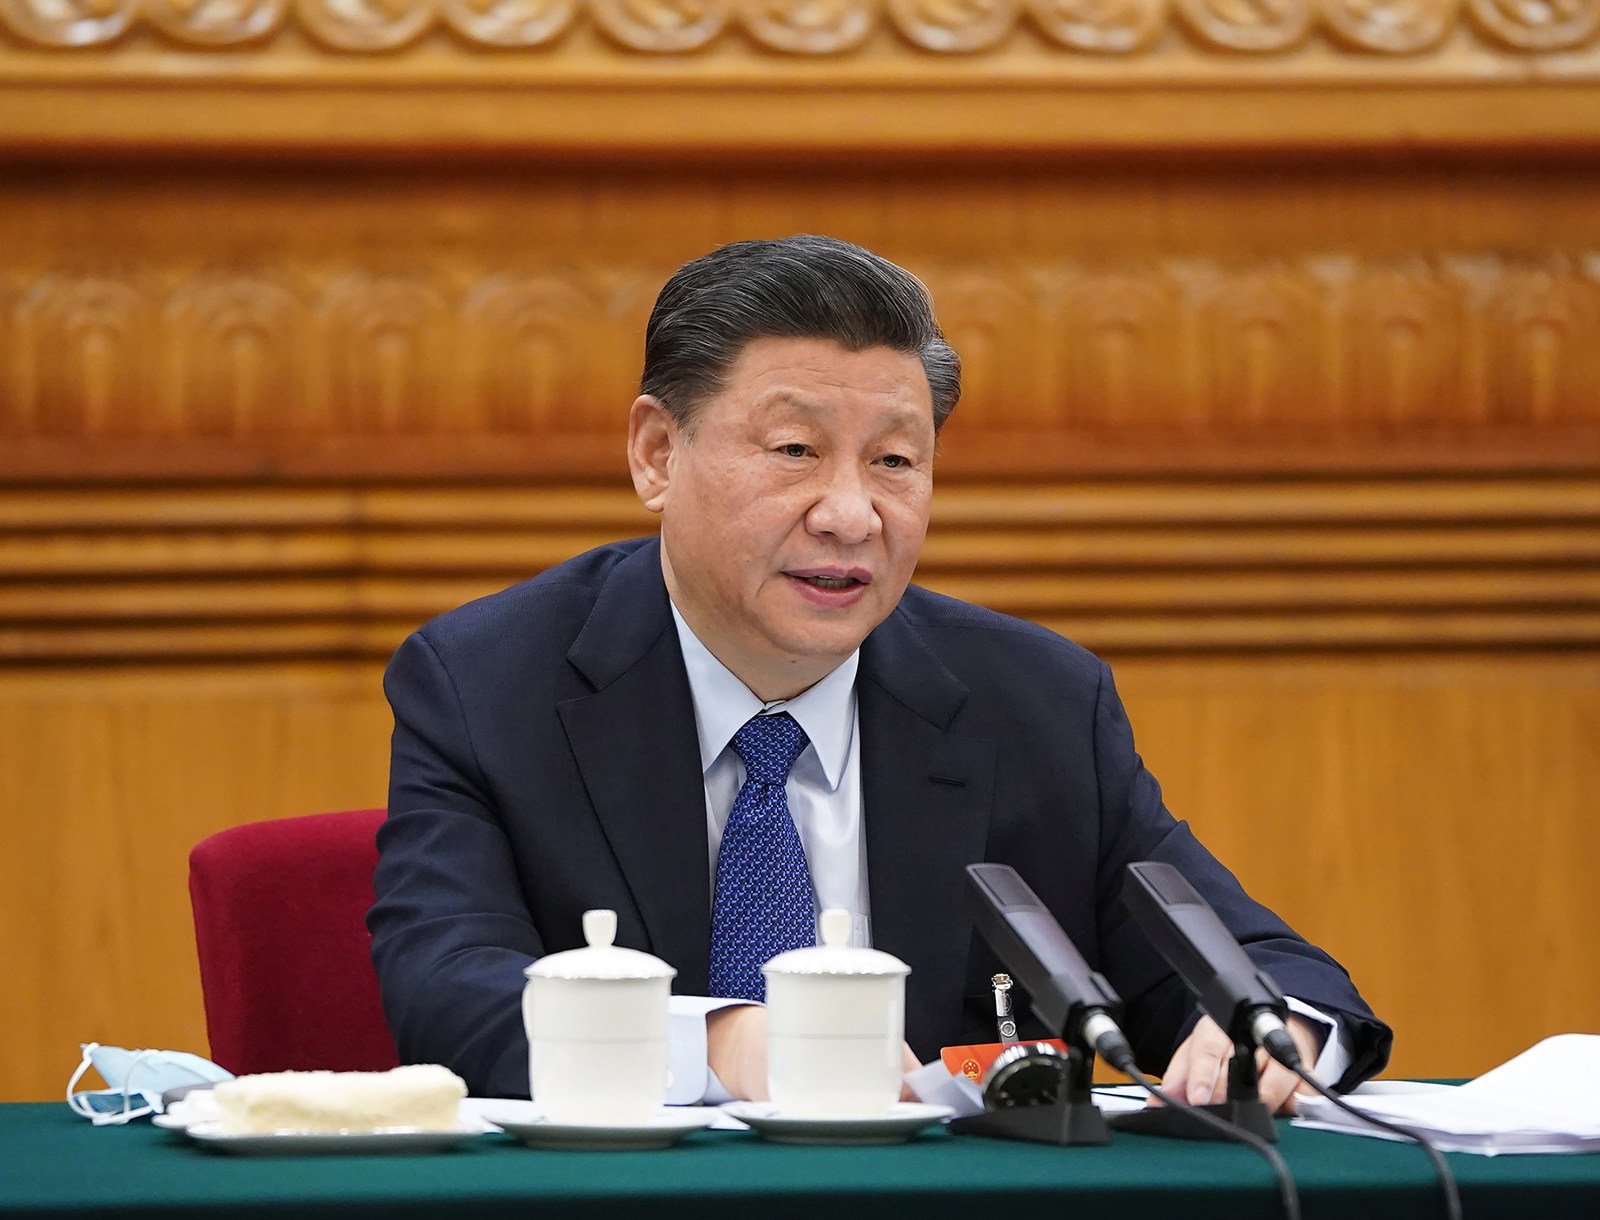 President Xi Jinping said “talks and negotiation” were the “only way out” of the war between Russia and Ukraine. Photo: TNS